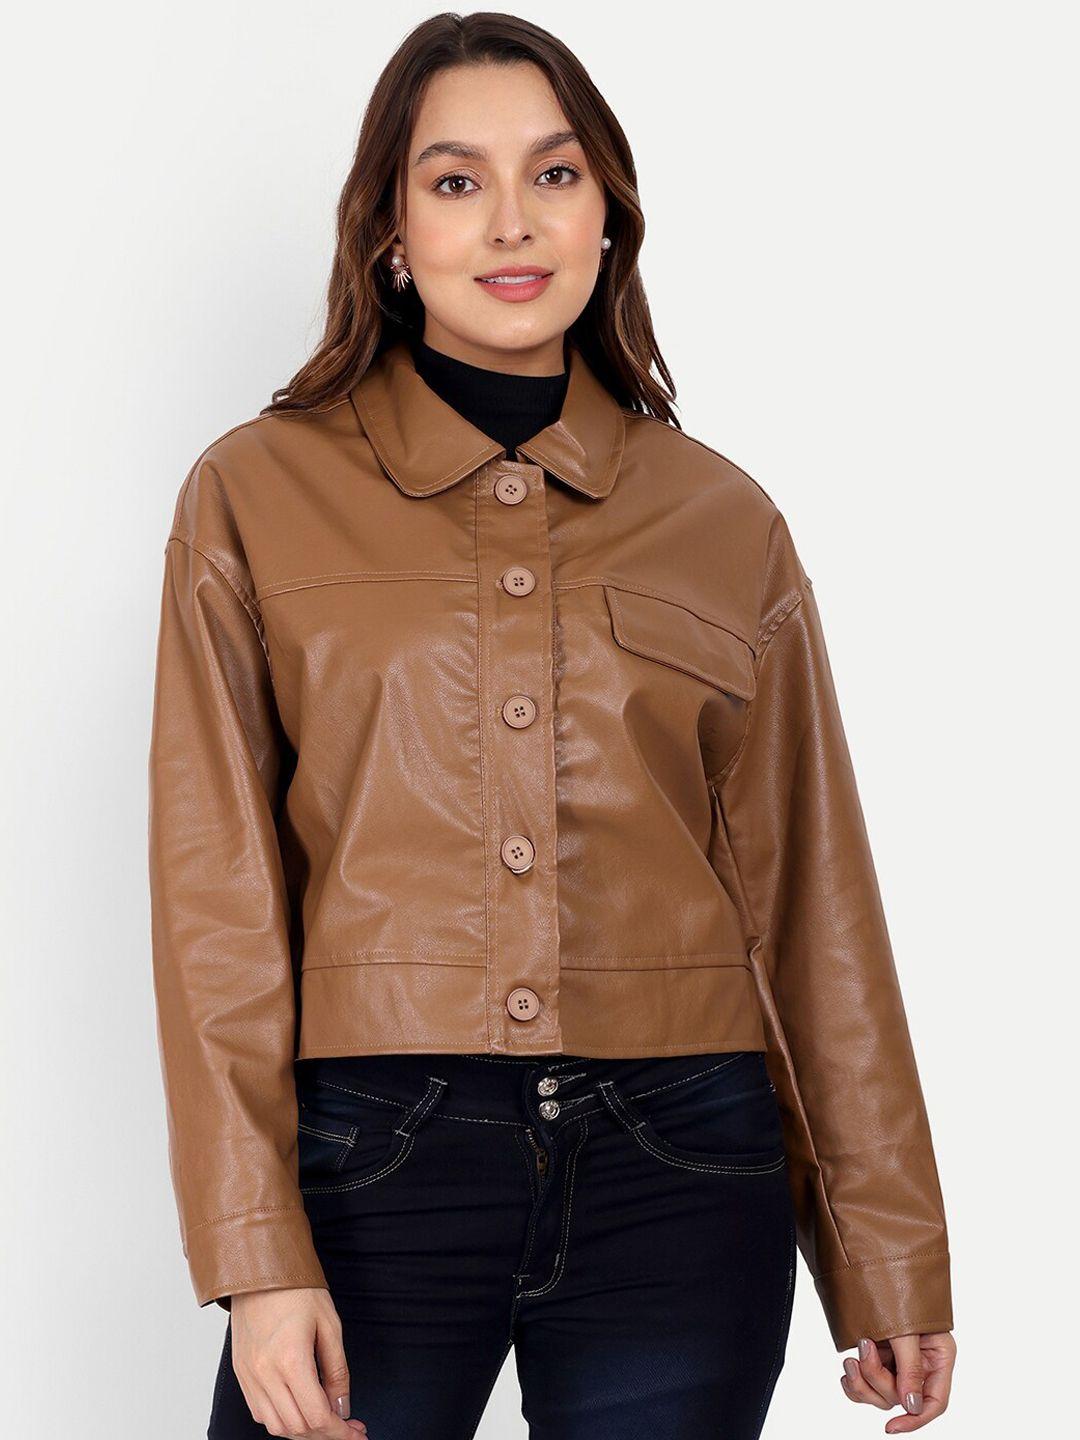 iki chic water resistant leather jacket